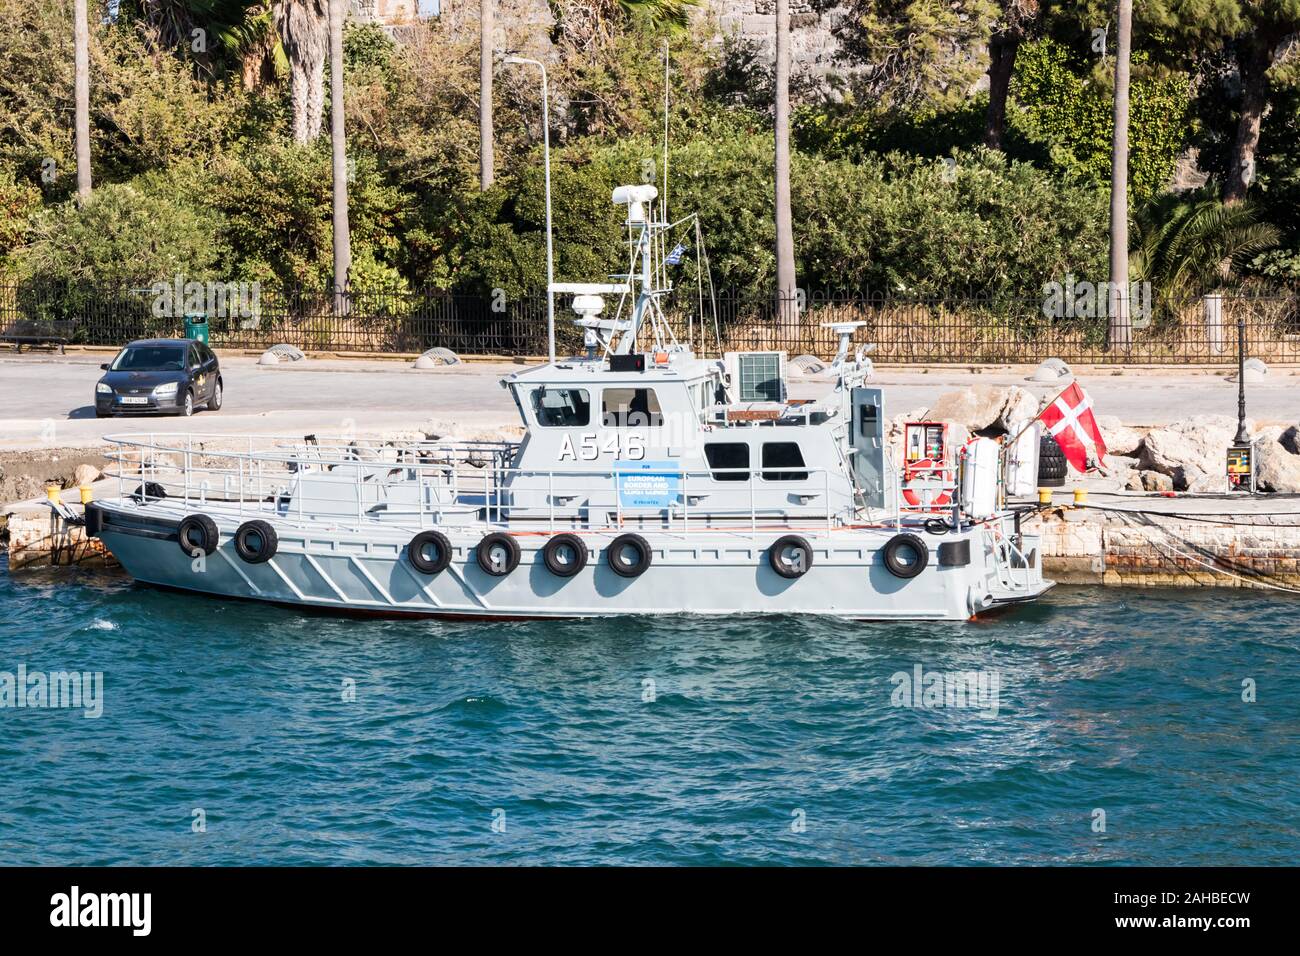 Kos, Greece - September 21st 2019: - Greek navy ship moored in the harbour. It is part of the European Border Control and Coastguard fleet. Stock Photo